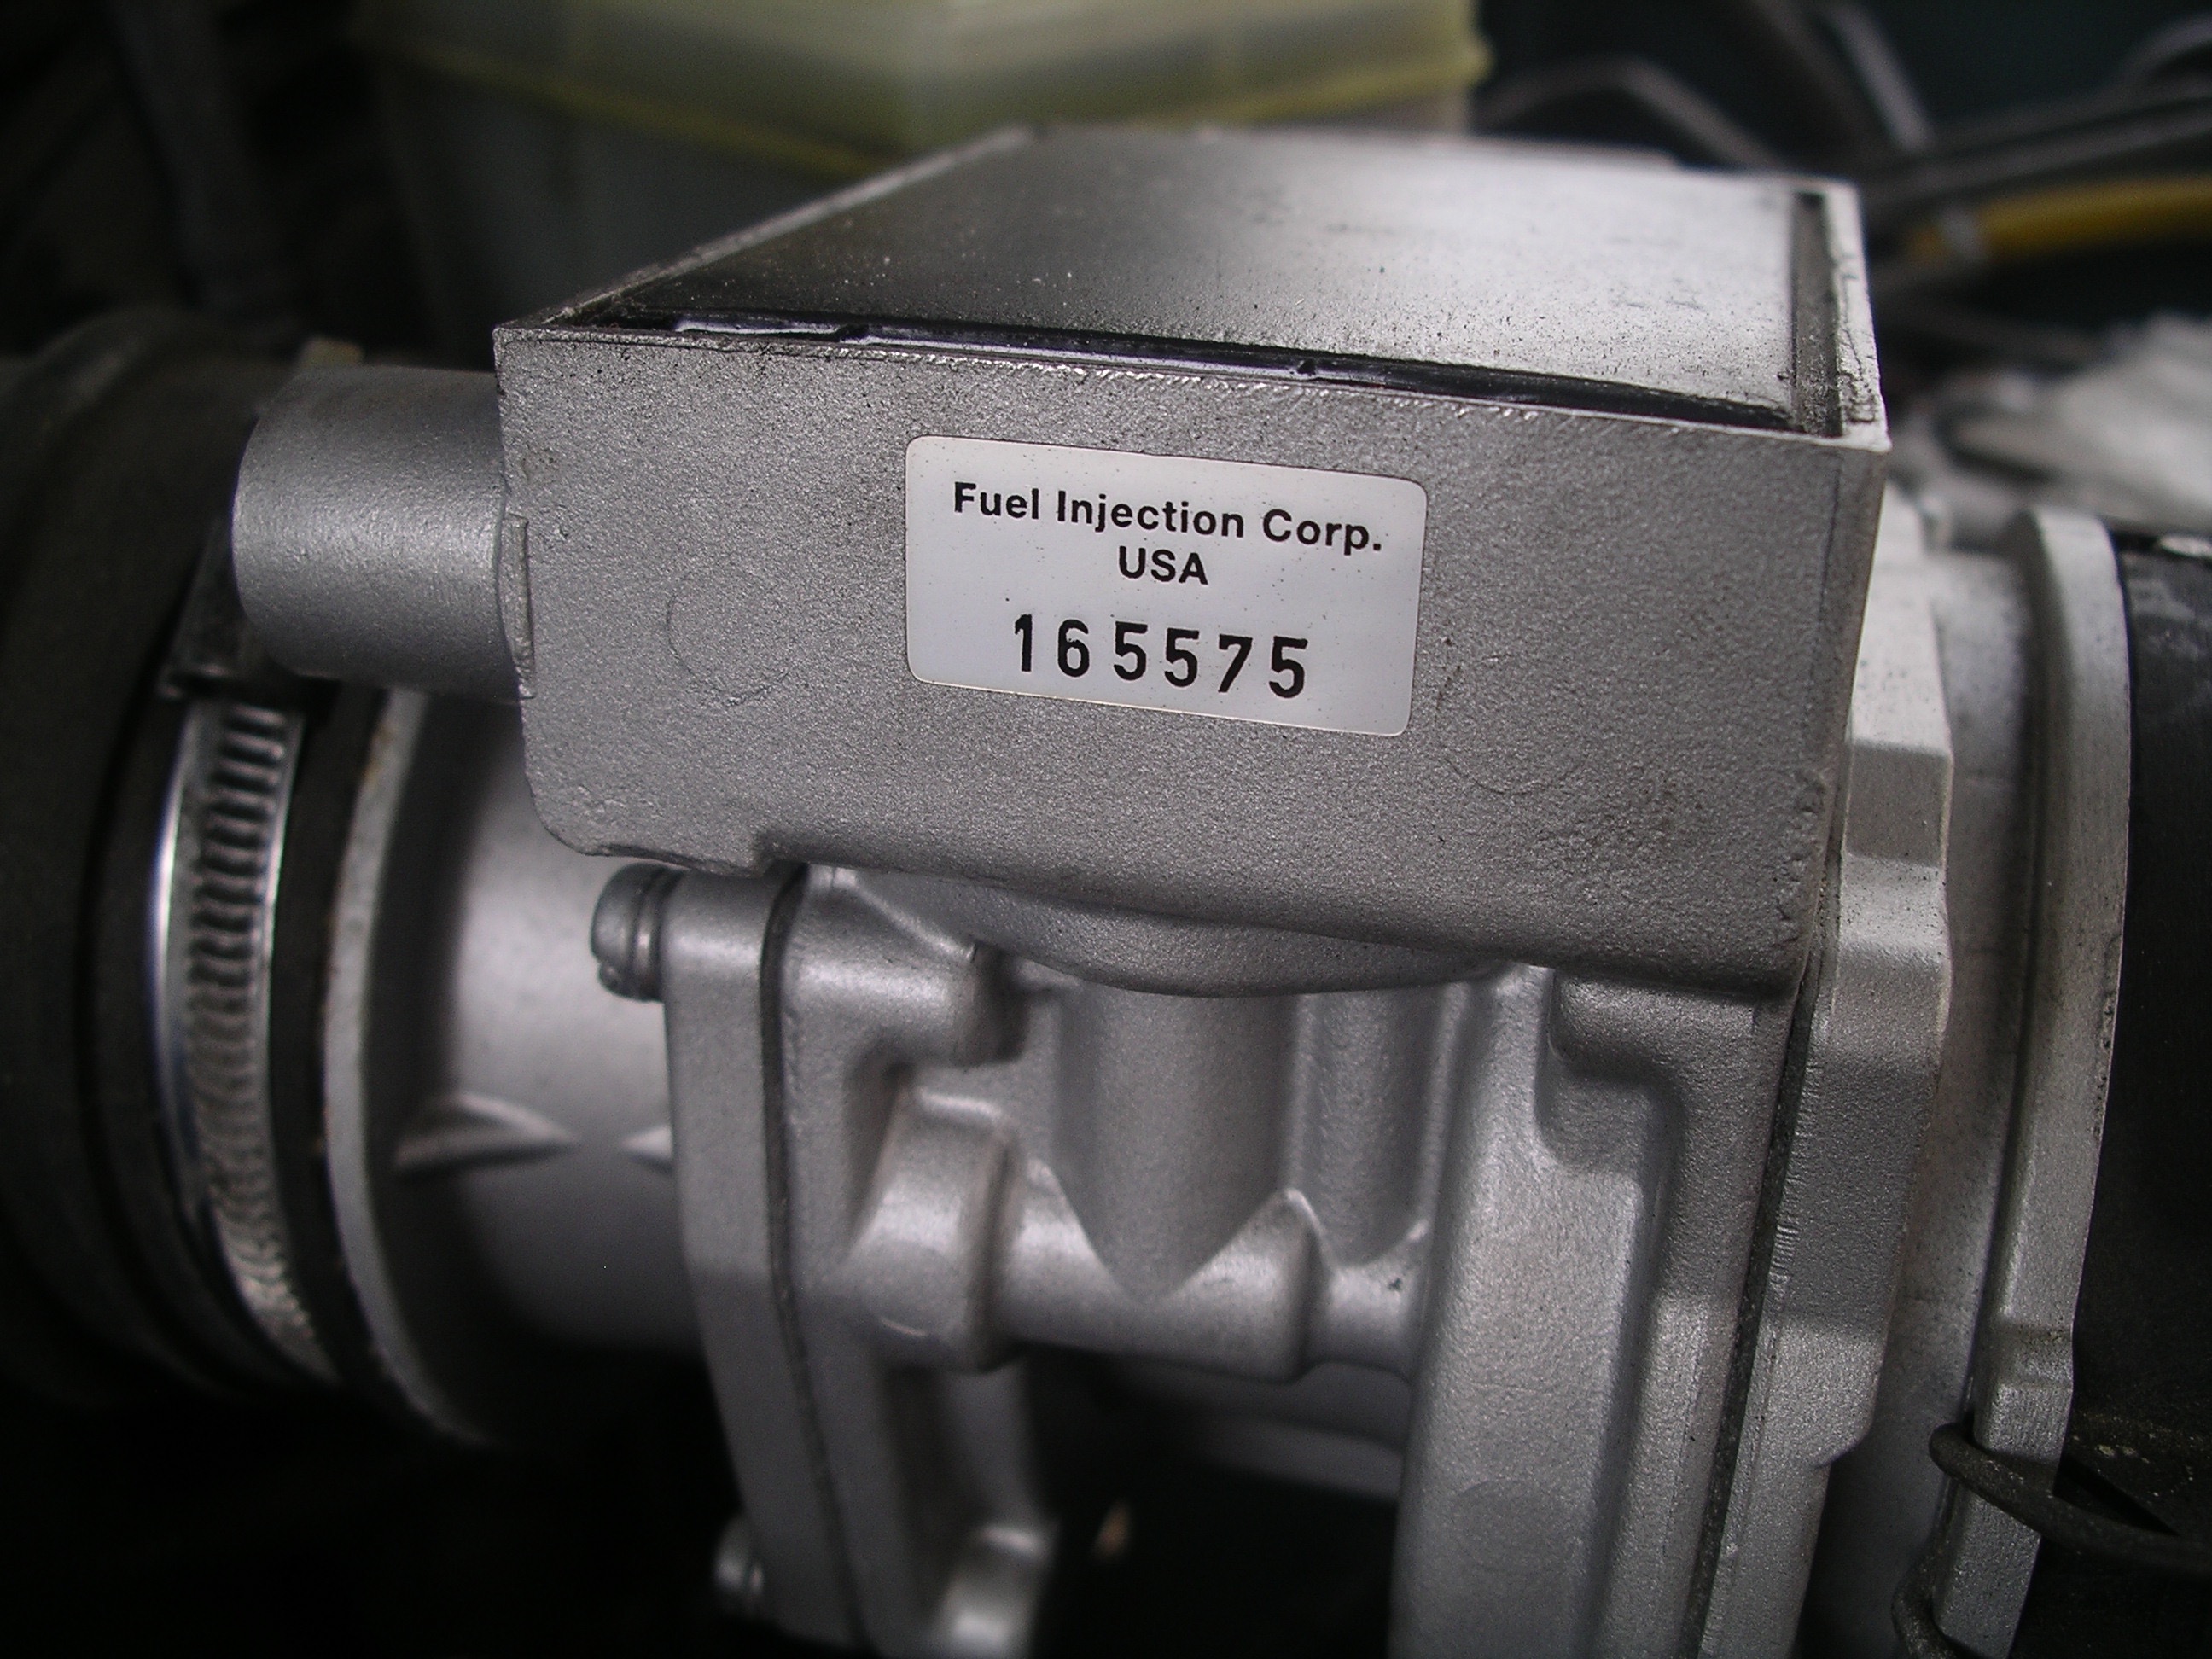 1995 Discovery wrong MAF sensor?? Land Rover Forums